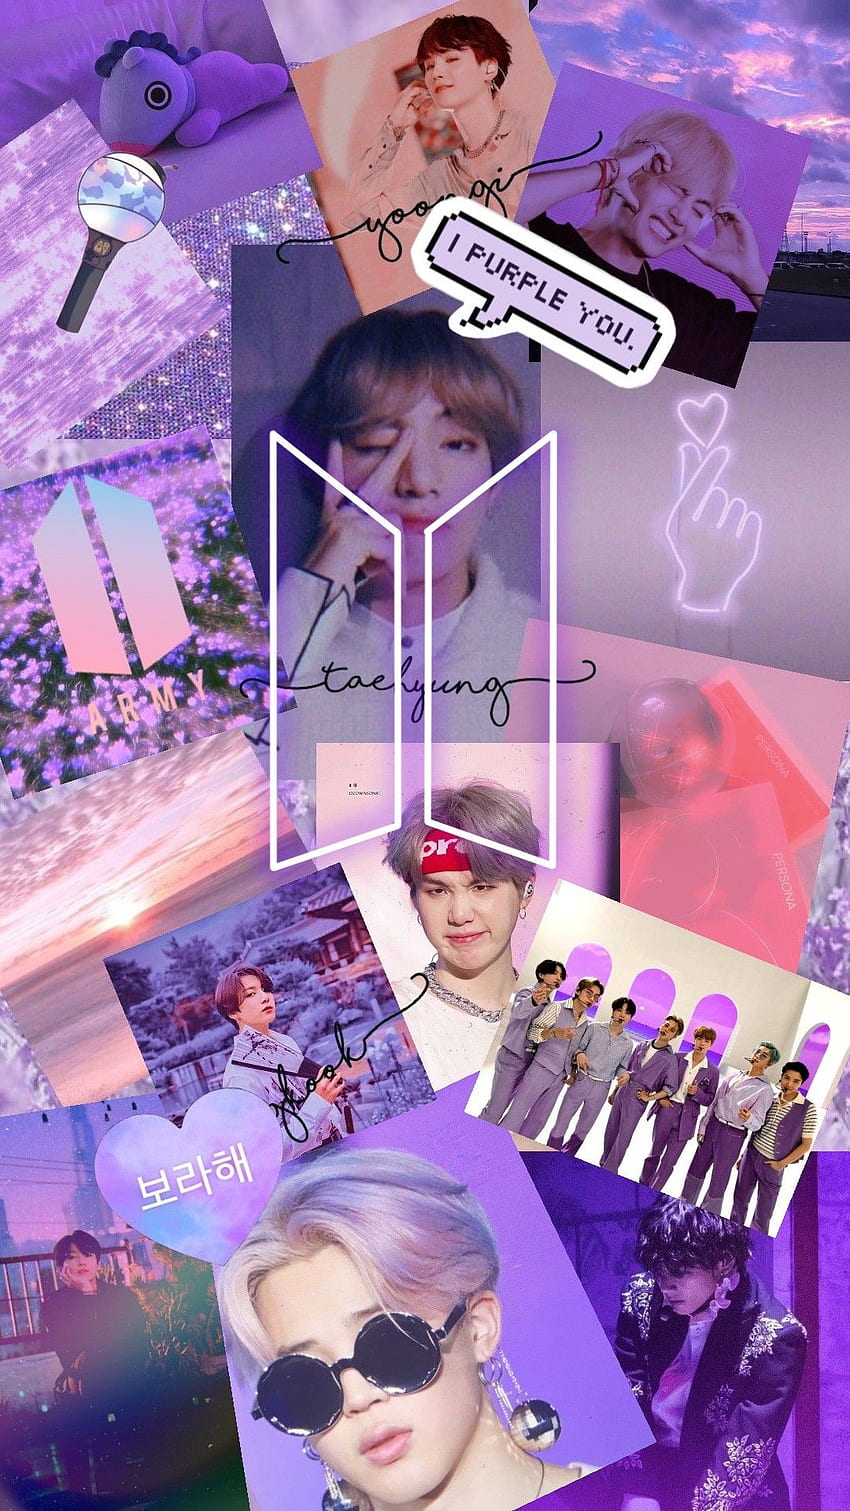 Another Bts Collage wallpaper by KimTaeTae  Download on ZEDGE  20e7